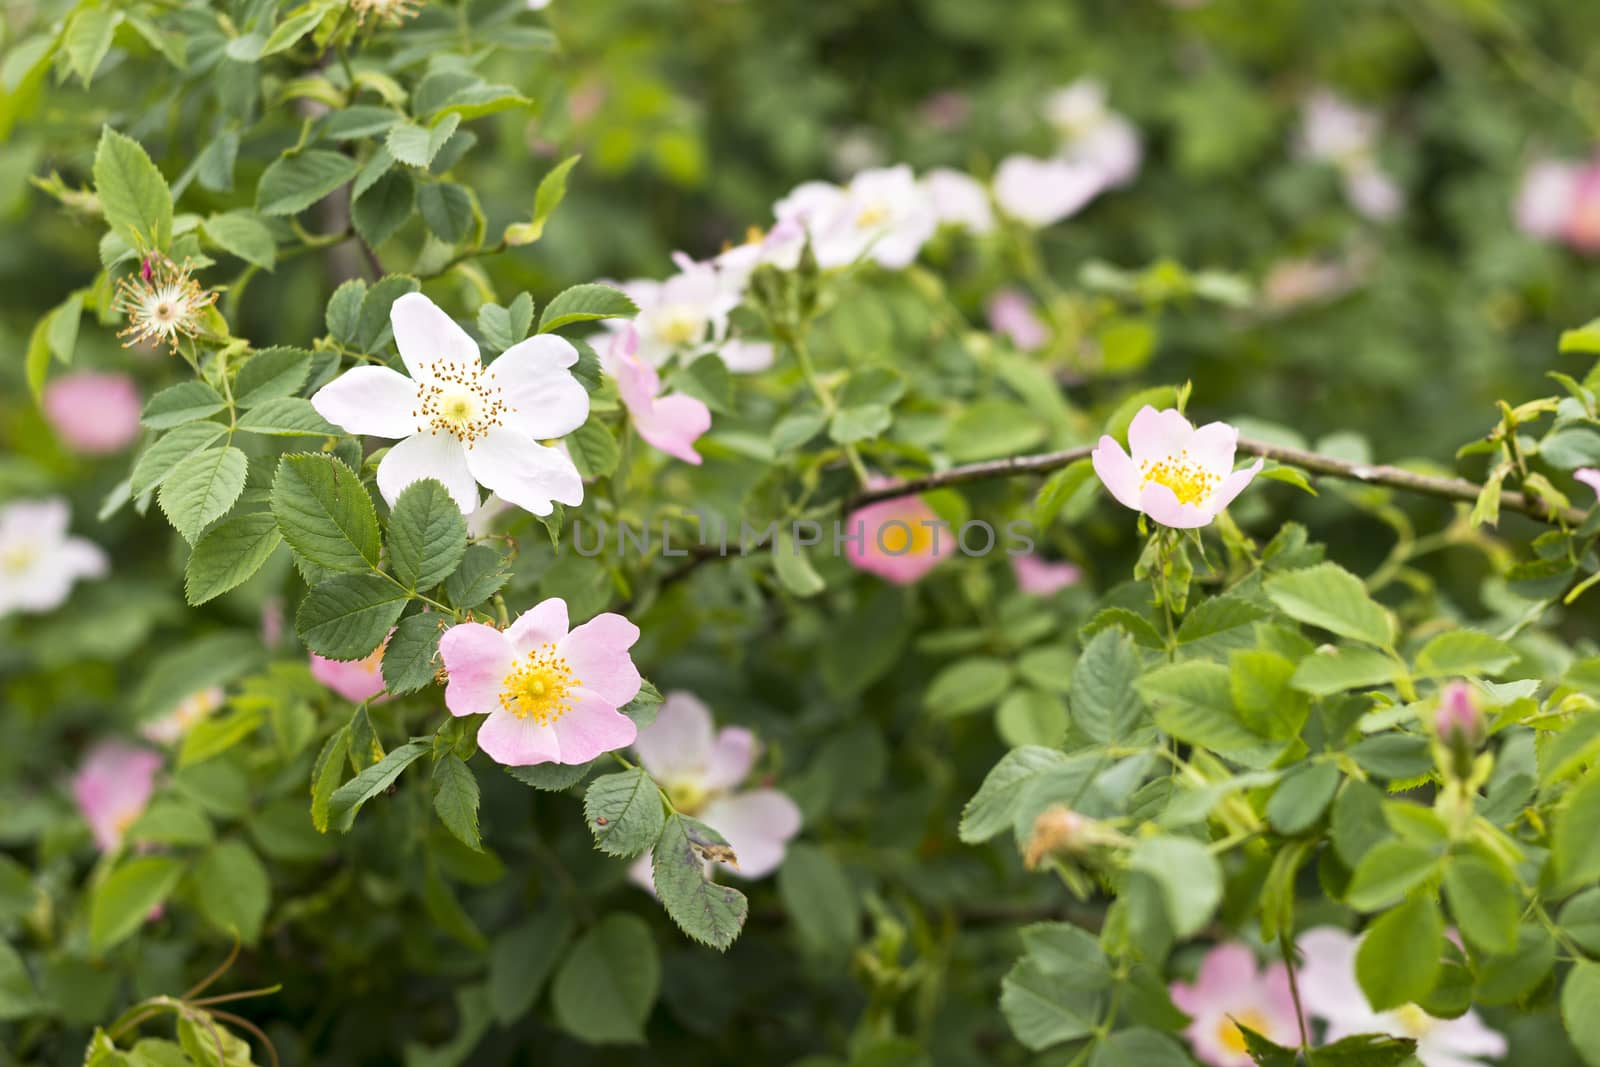 Flowers of wild rose (dog-rose) growing in nature. Selective focus